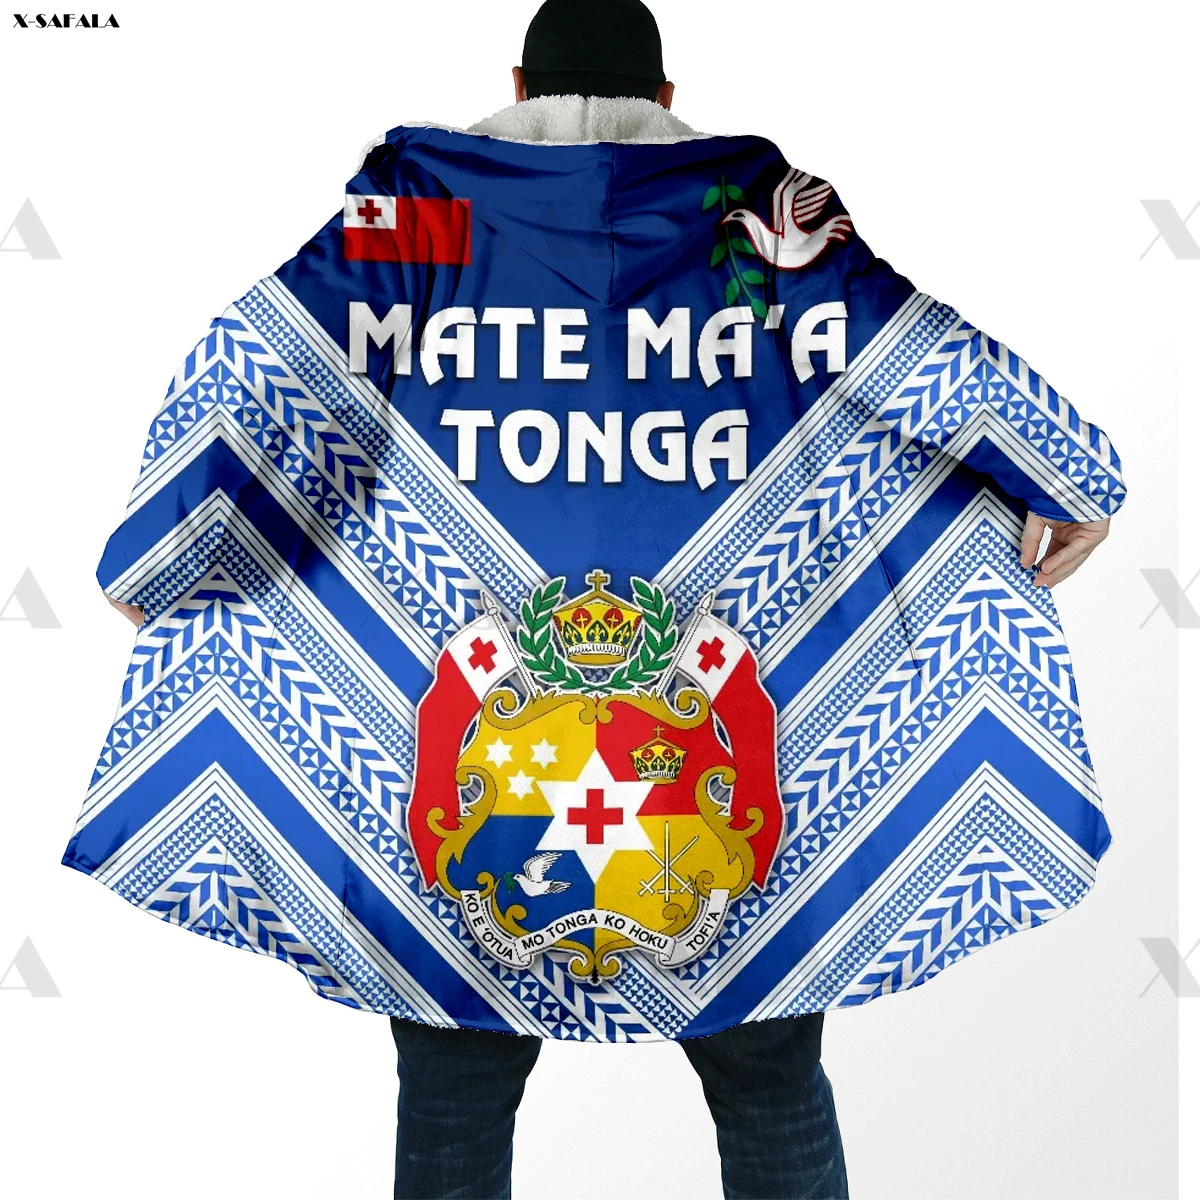 

Polynesia Mate Ma'M Tonga 3D Printed Hoodie Long Duffle Coat Hooded Blanket Cloak Thick Jacket Cotton Pullovers Dunnes Overcoat